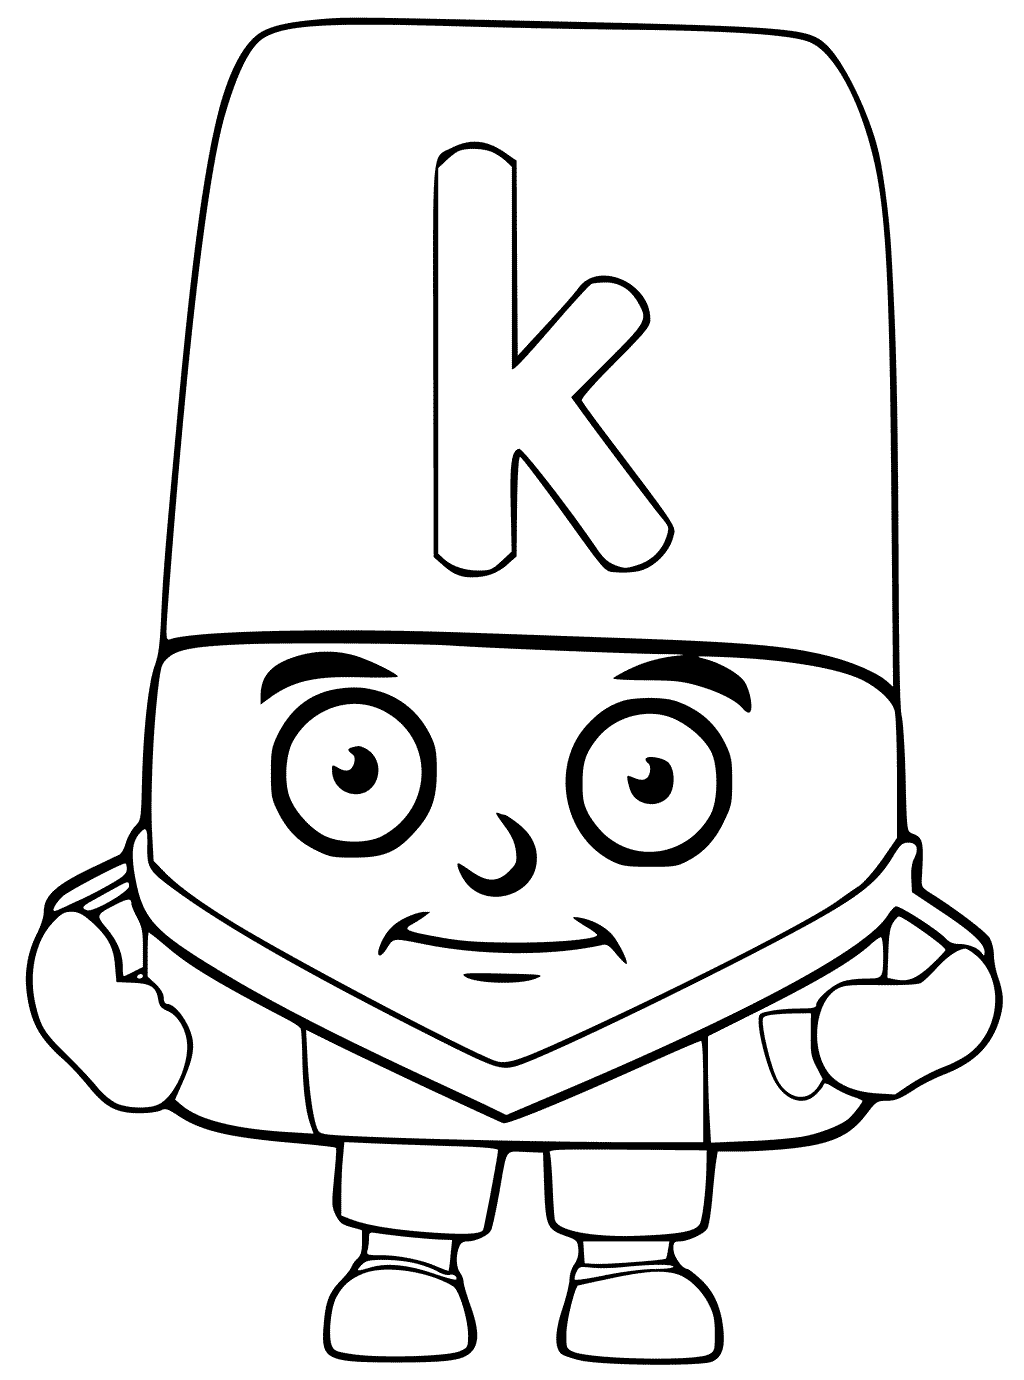 Let's Have Fun with Alphablocks Coloring Pages Pdf - Alphablocks Coloring Pages K